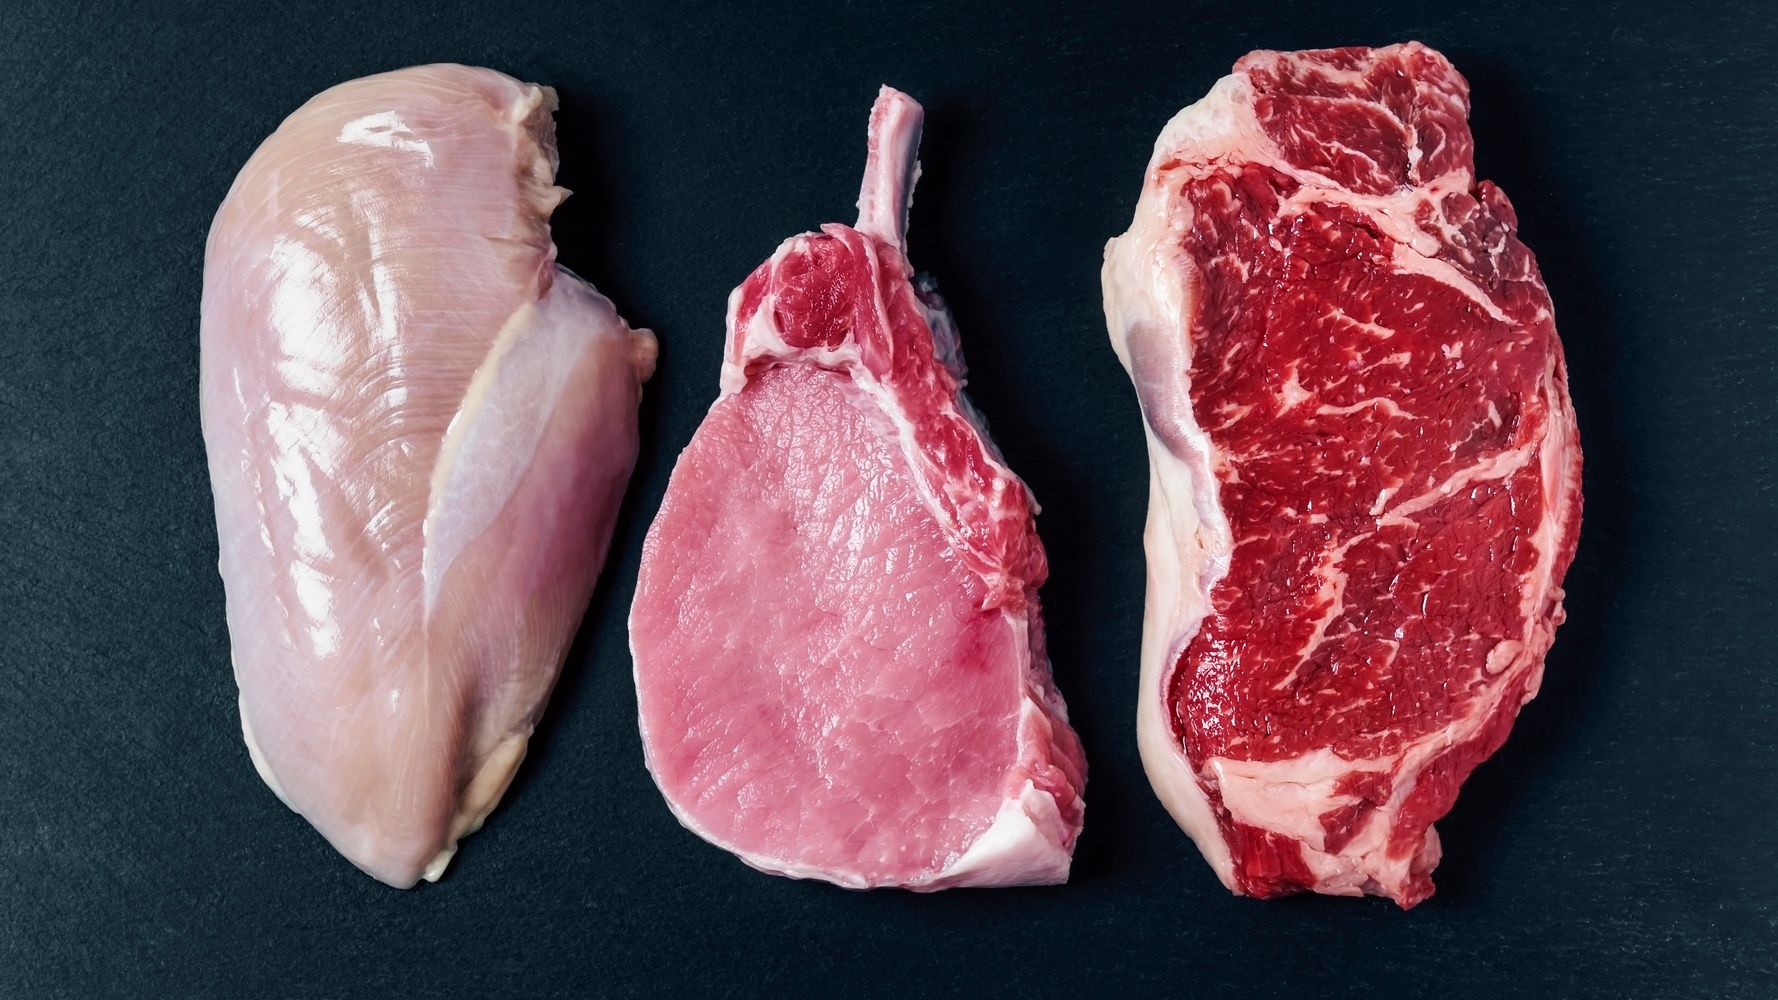 How To Handle Raw Meat According To Food Safety Experts Huffpost Life